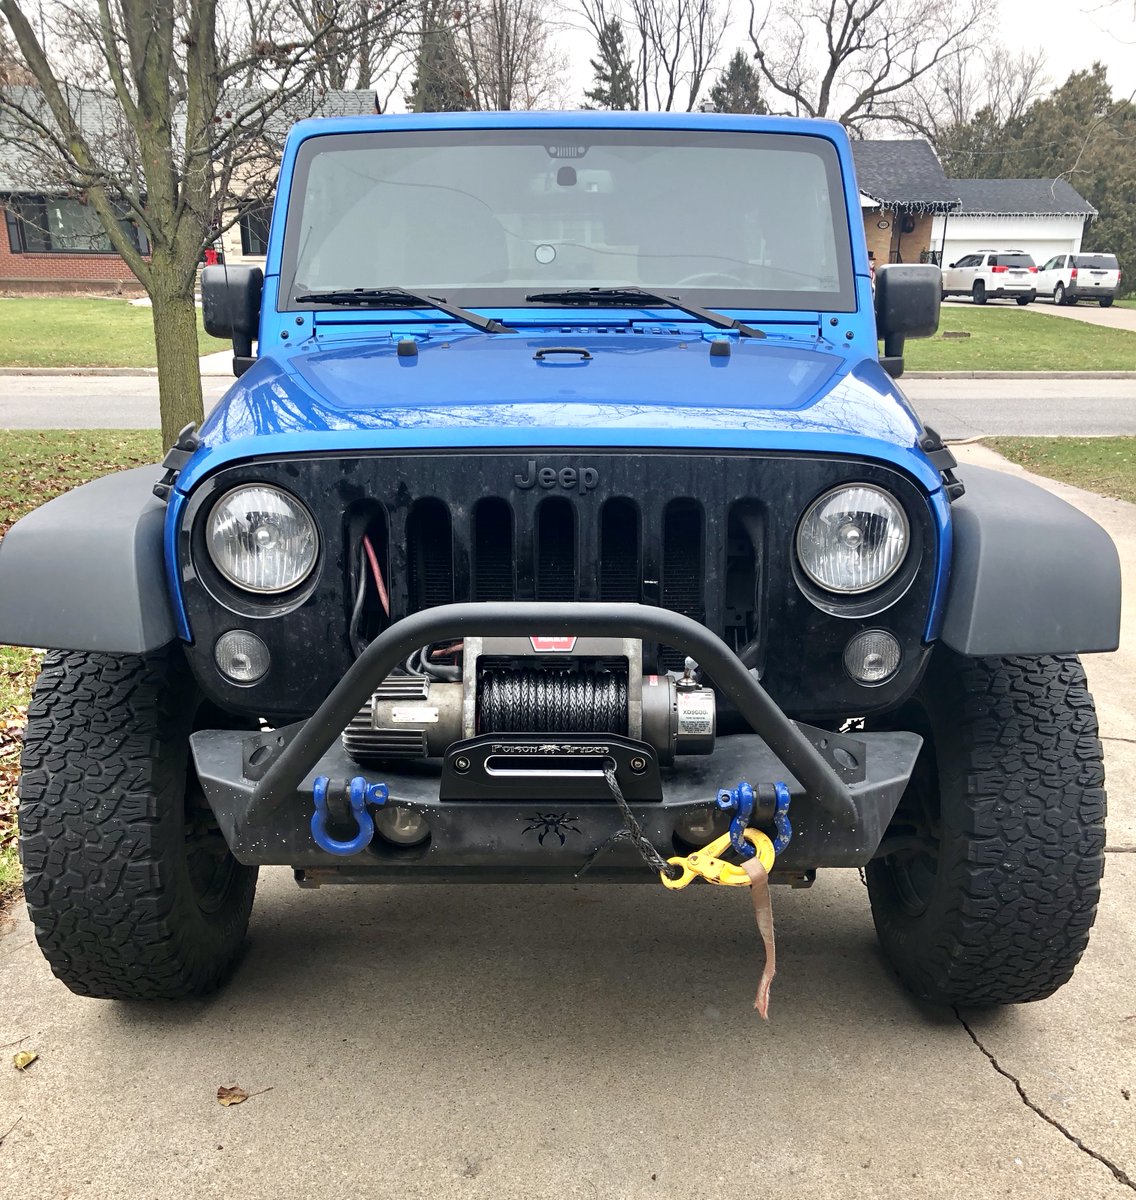 After much work and learning, the xd9000i is back up and running. New #ultraranger winch line, #thegrabber retainer strap, #poisonspyder fairlead. Re-greased with @KlondikeOils Moly Tac EP-2. #offroadrehab #jeeplife @THEJeepMafia #7slotnation #519jeeps